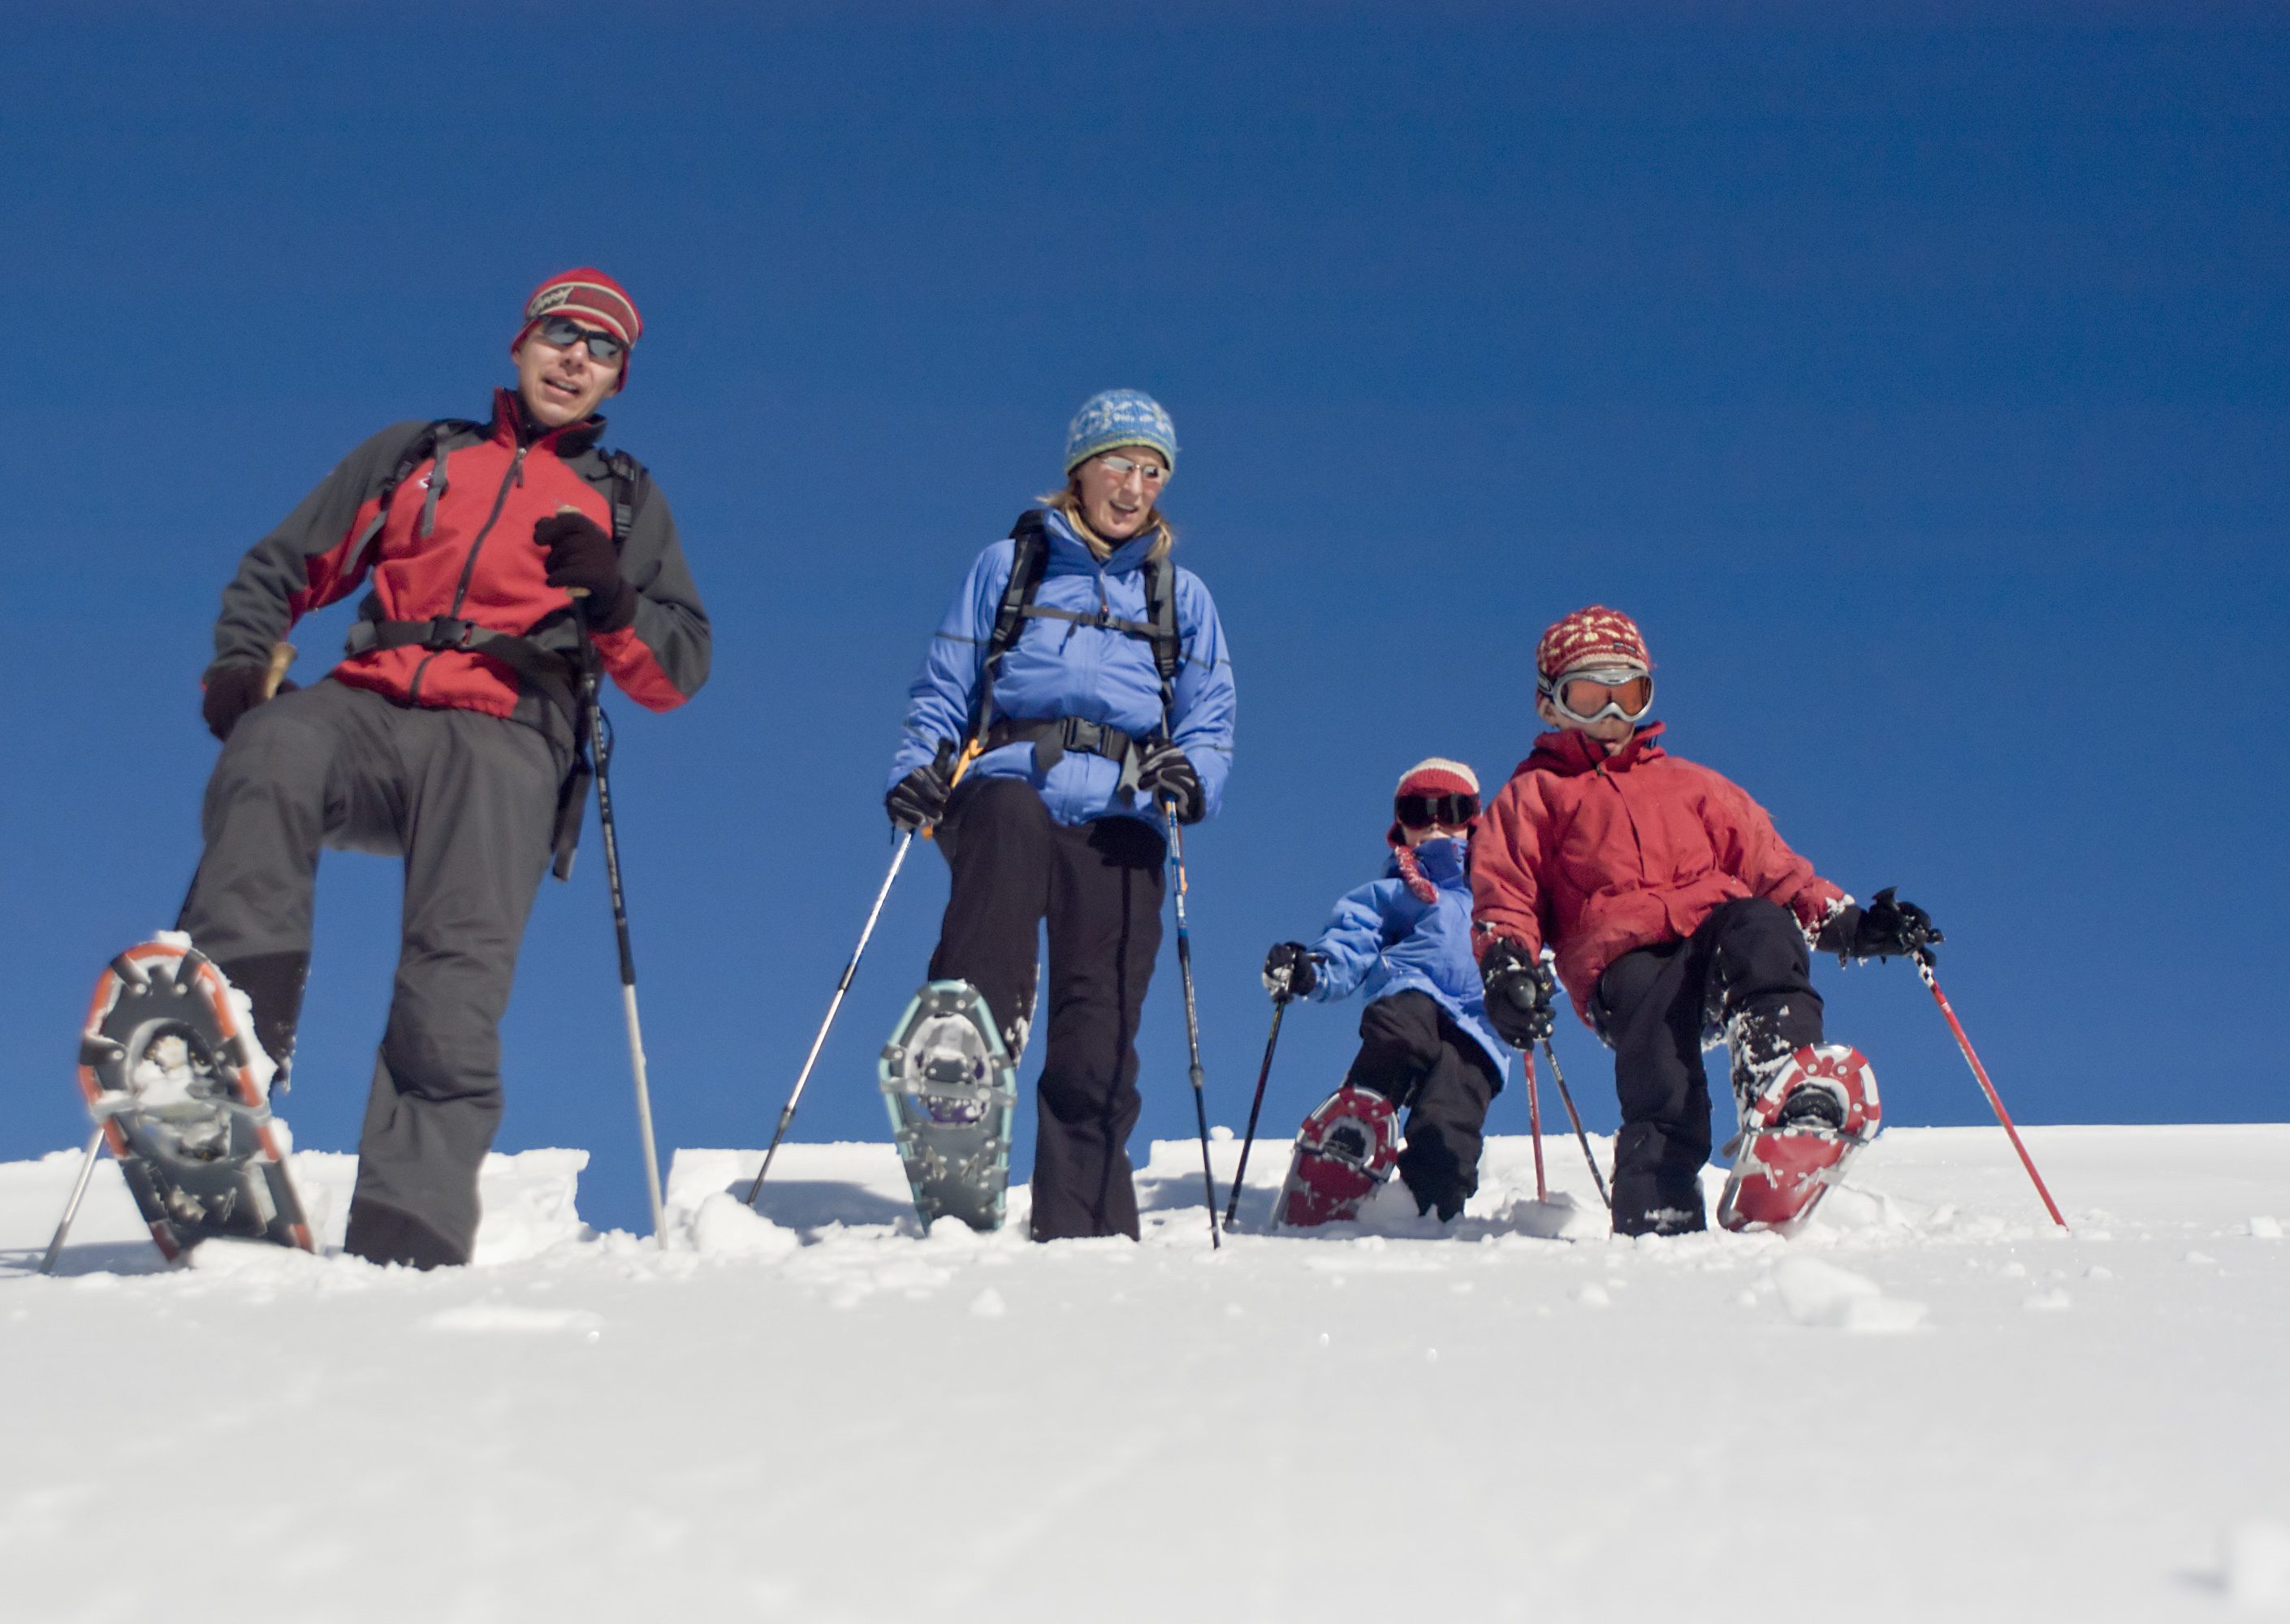 A family of four enjoys a snowshoeing excursion on a bright, sunny day.